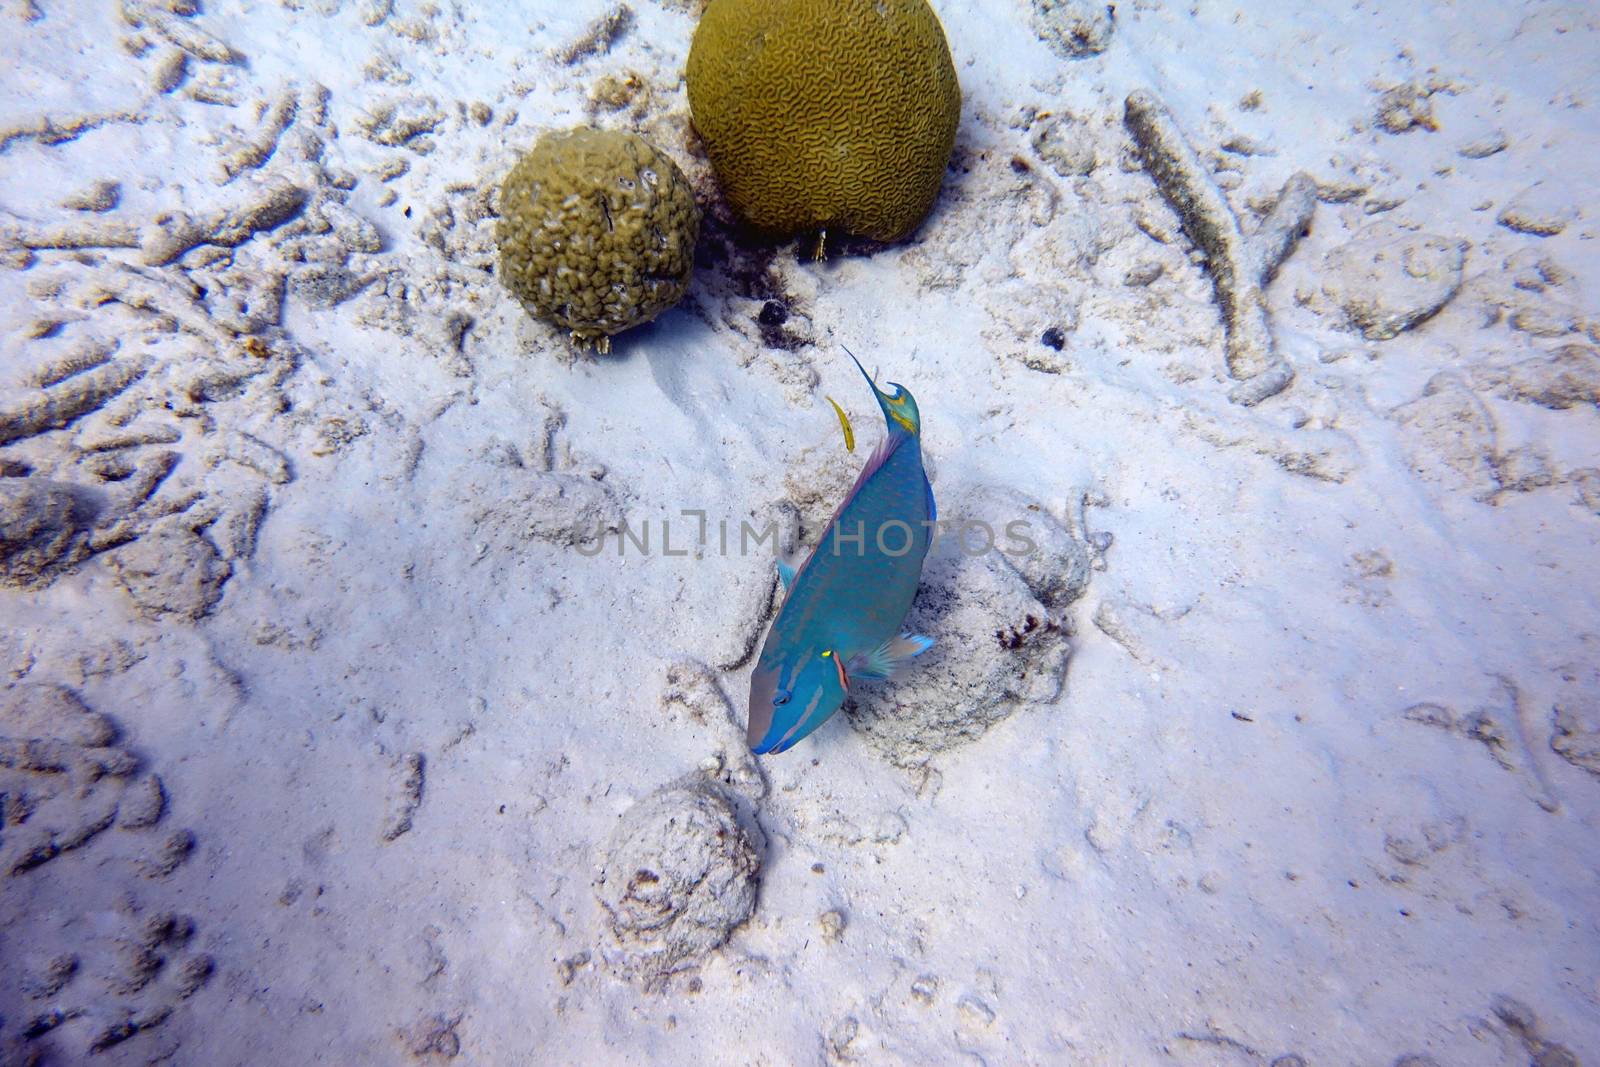 An underwater photo of a Parrotfish  by Jshanebutt